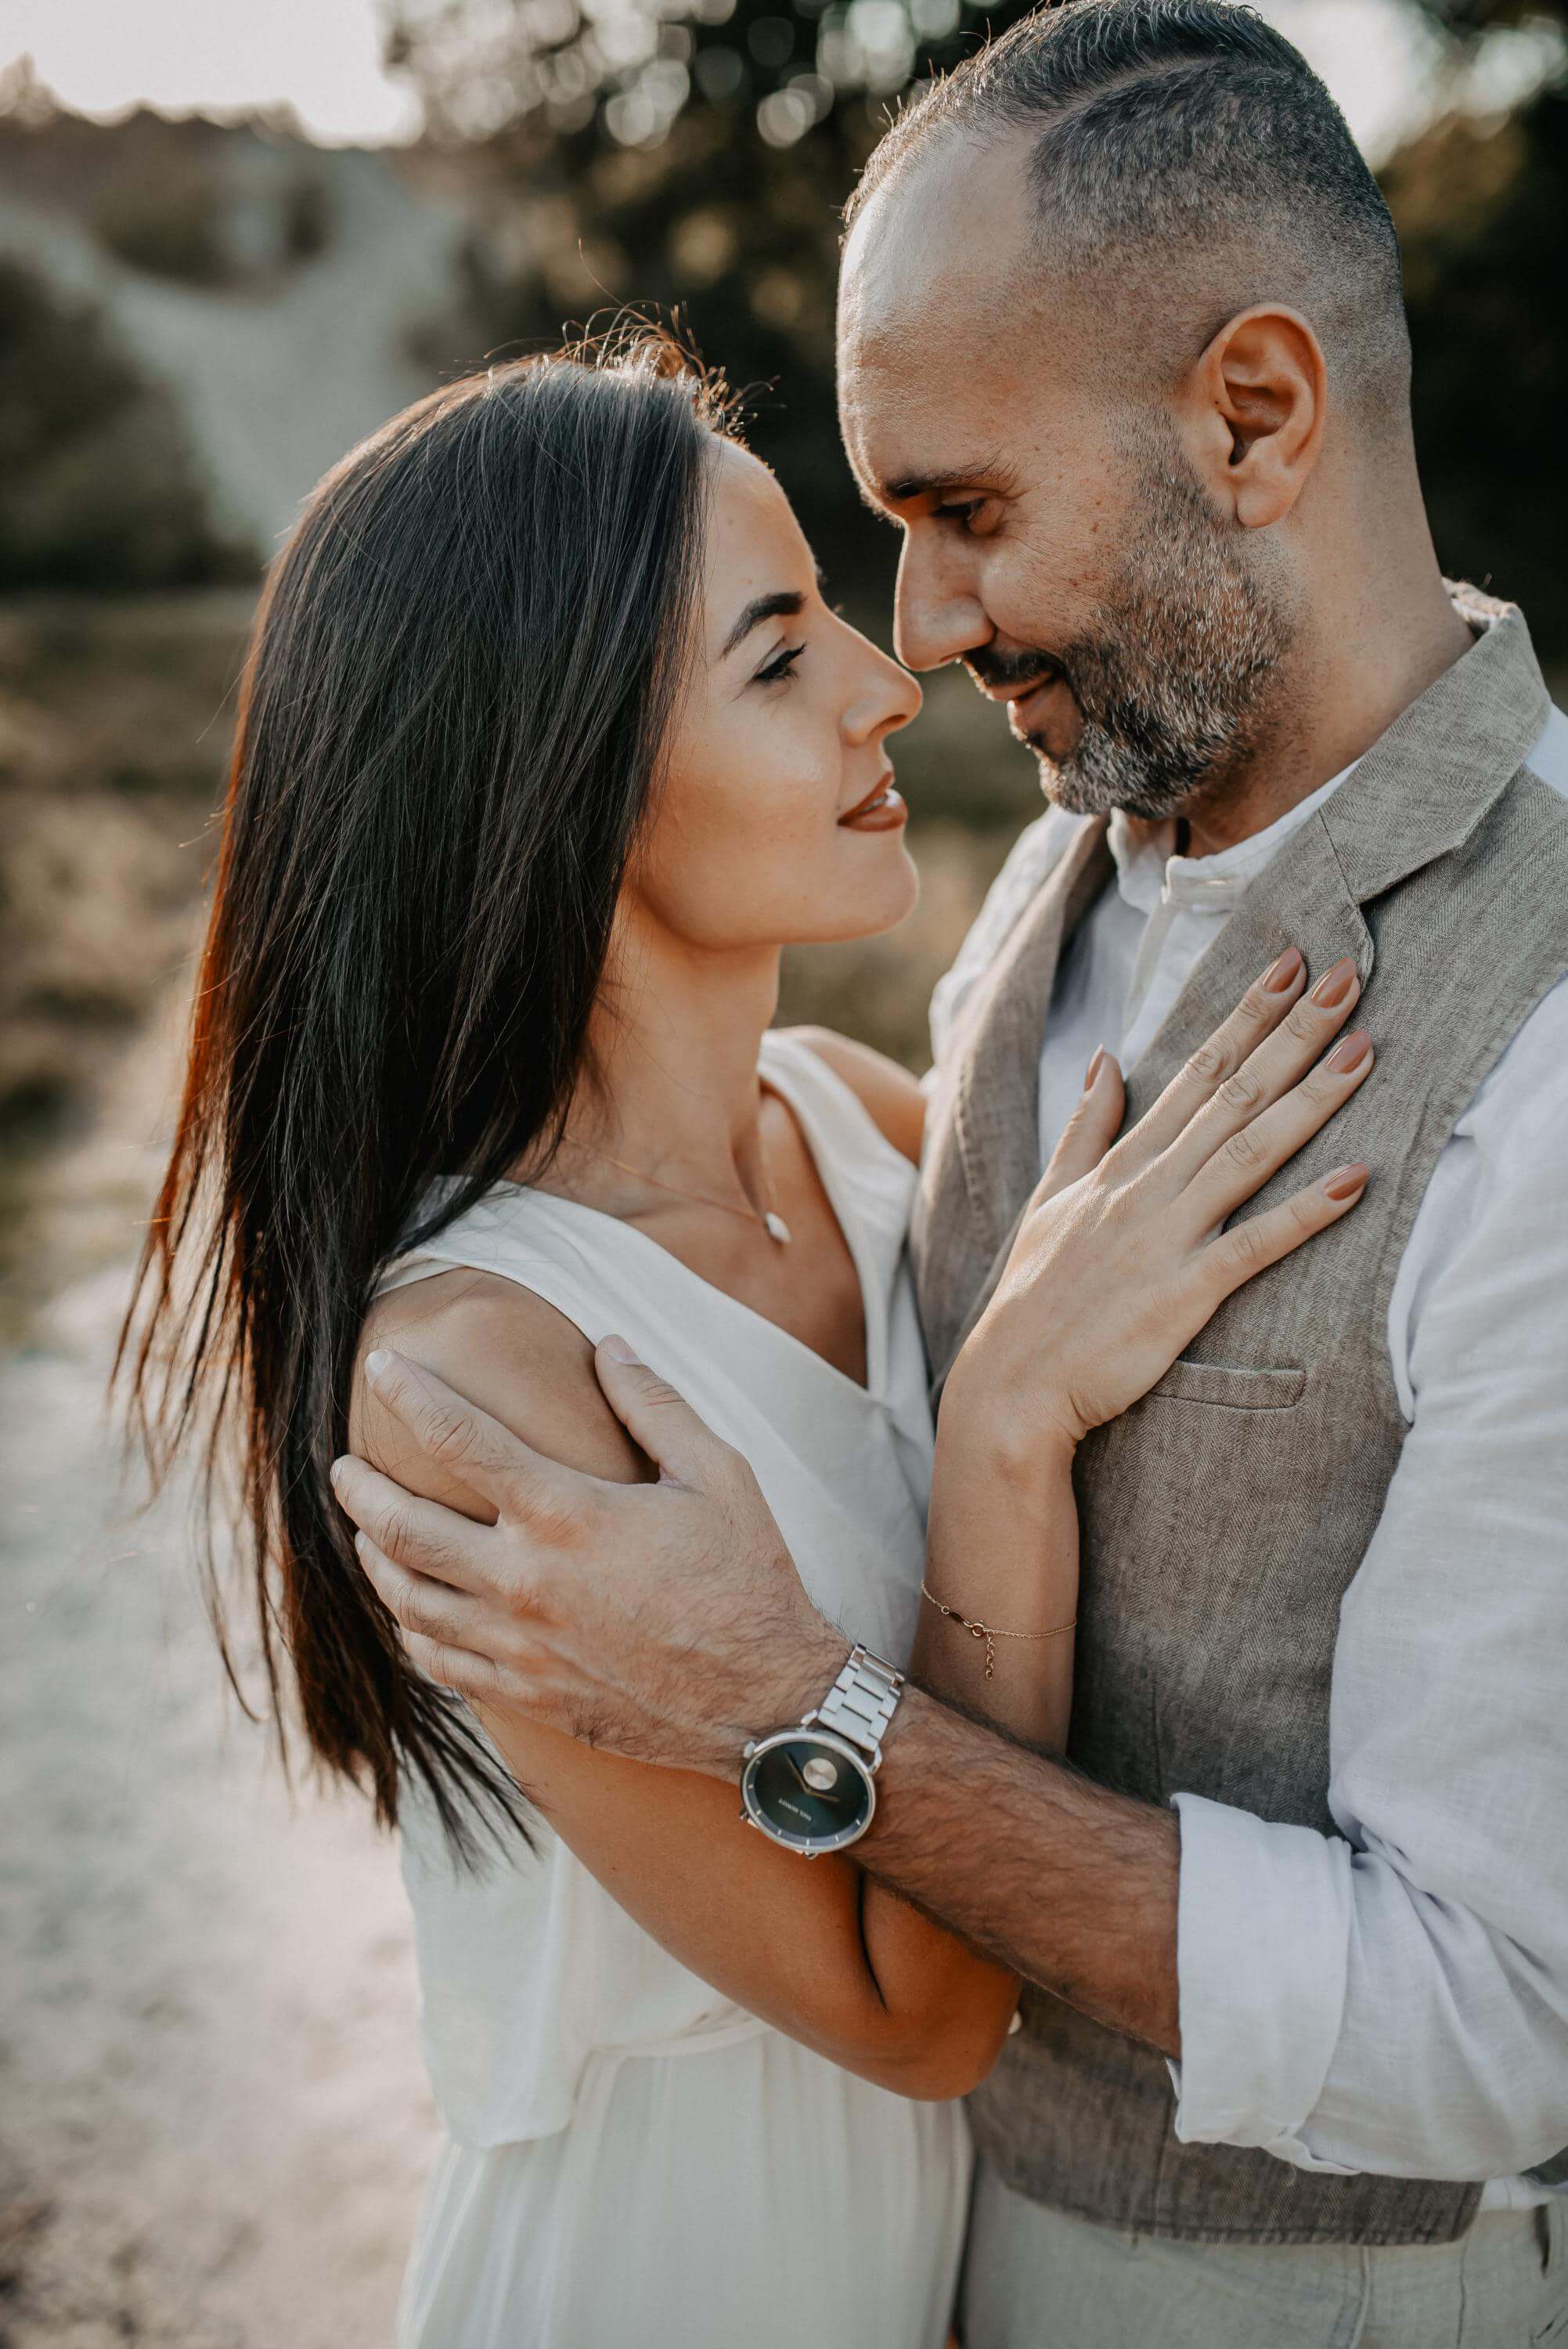 Standing nose-to-nose close together, a woman and man look into each other's eyes in love for an engagement photo. Both are dressed in southern vintage style, with him wearing a beige linen waistcoat.